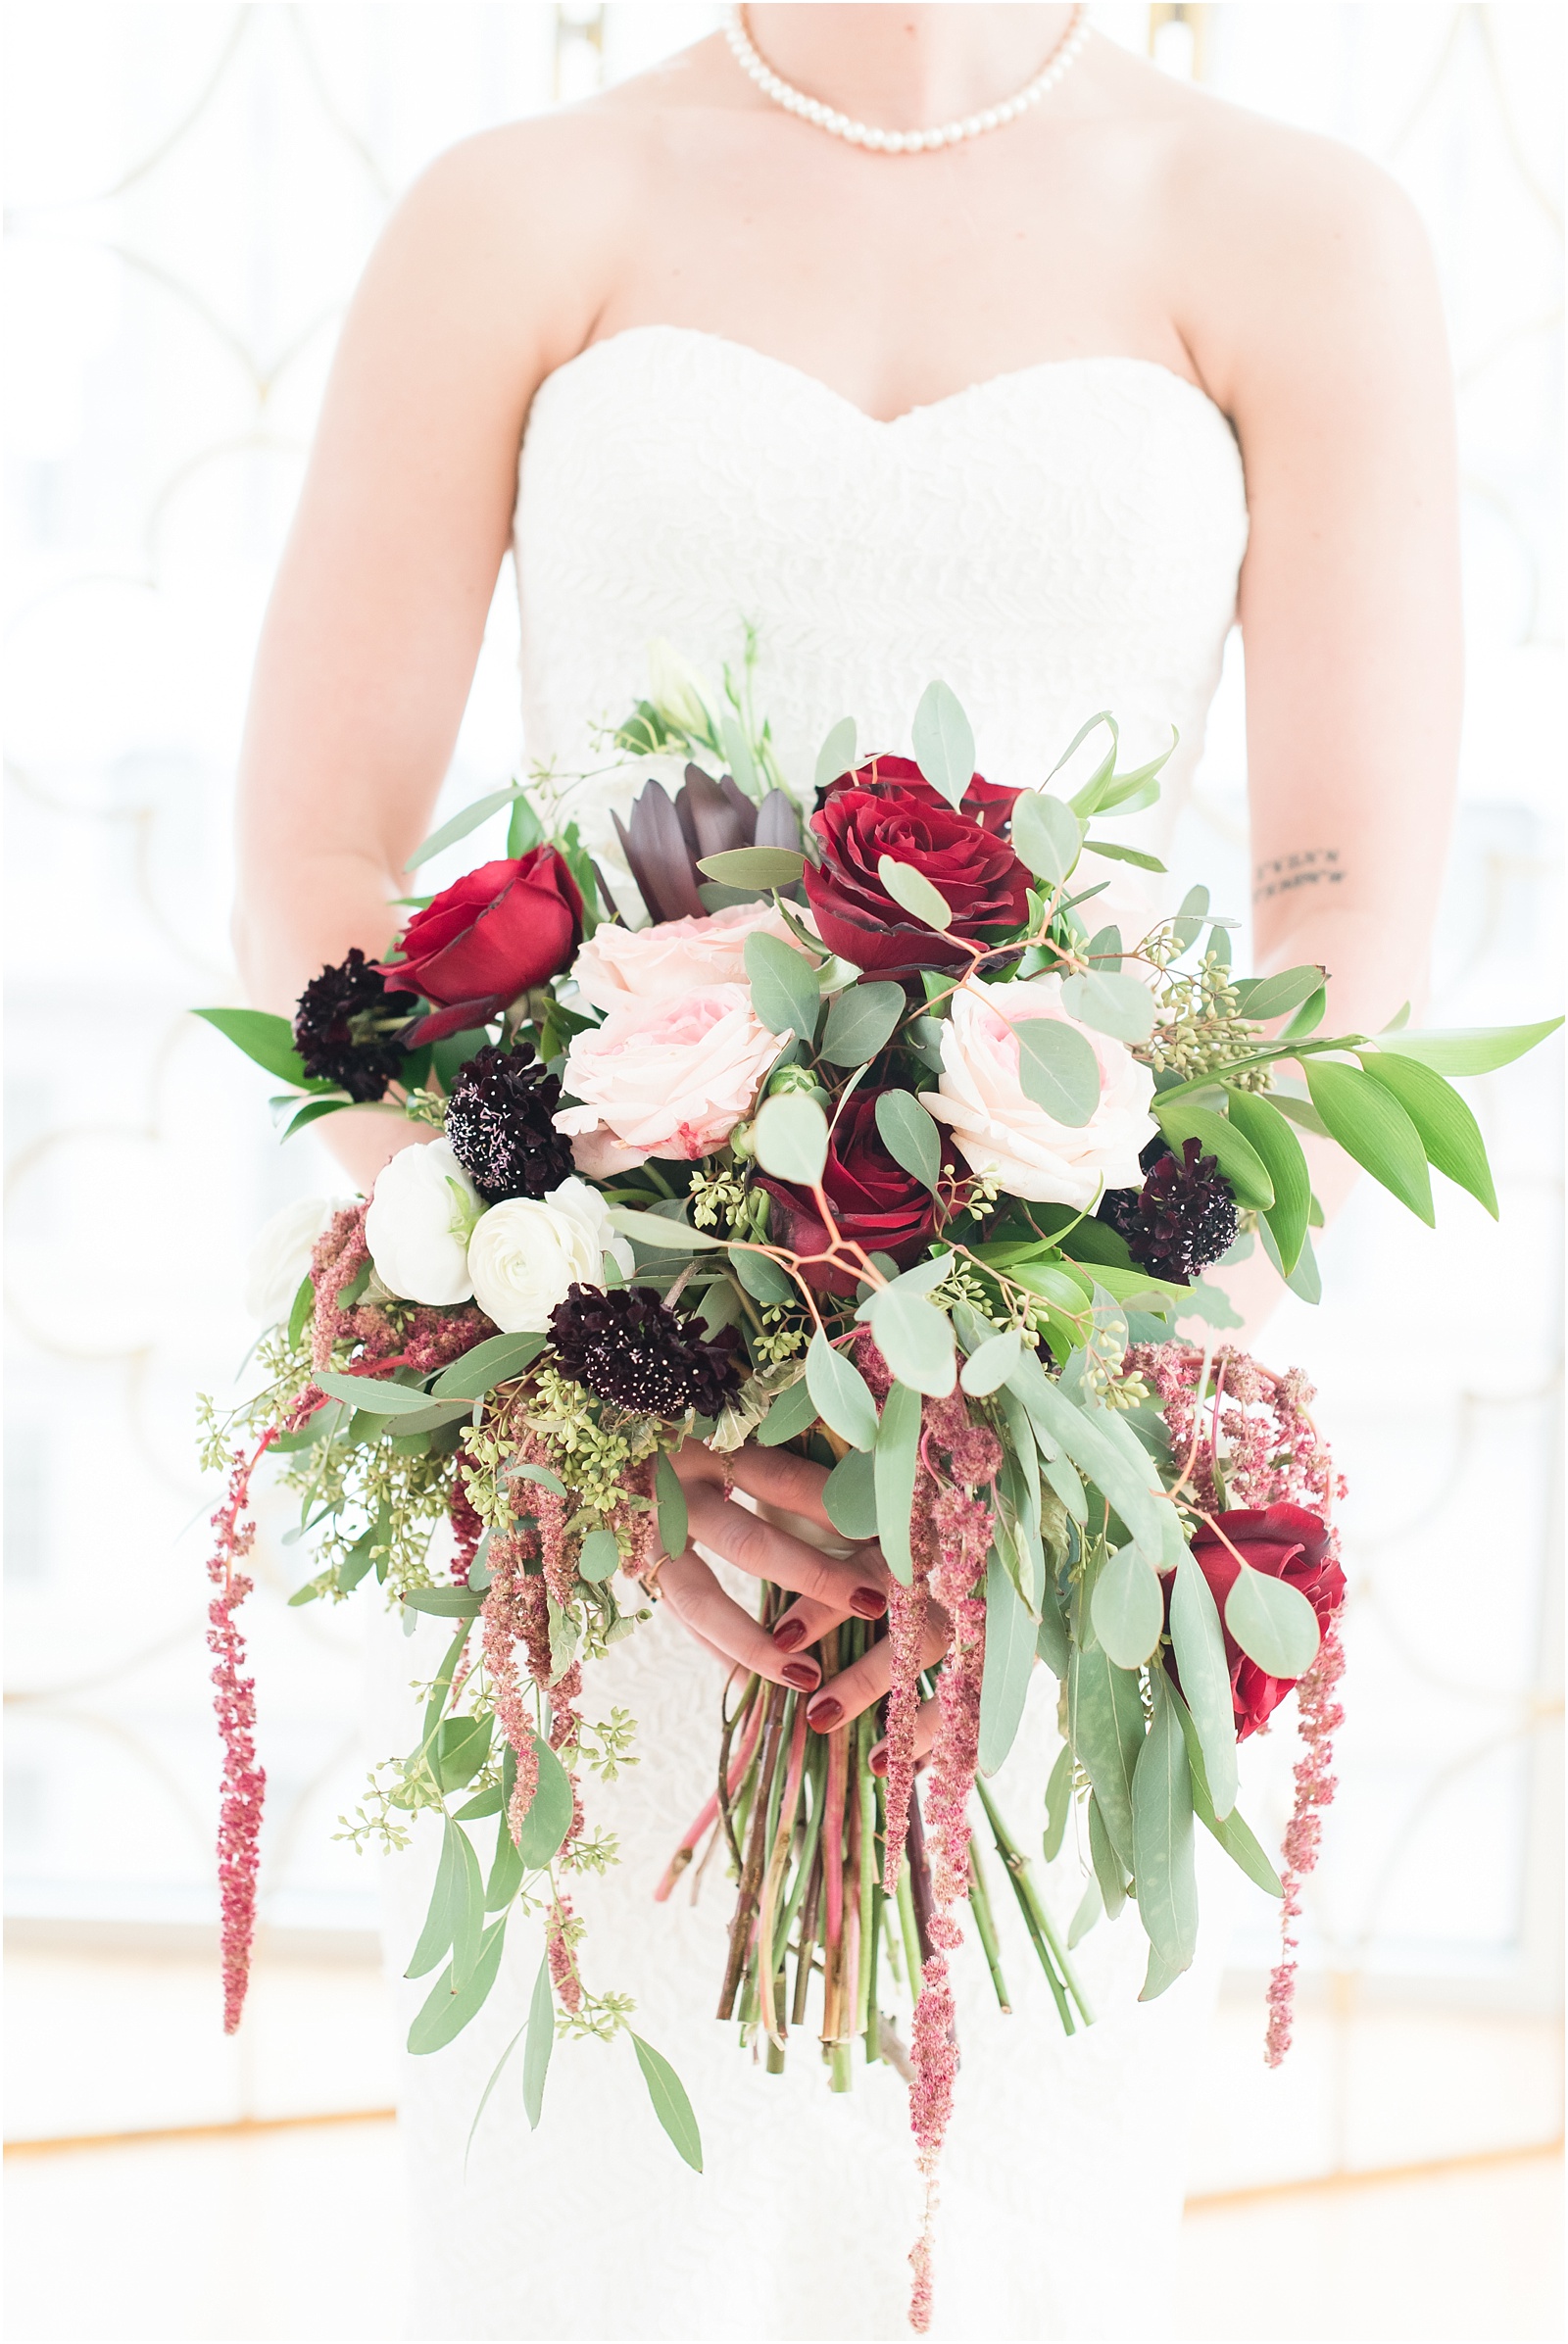 Lush bridal boquet with soft green leavs, red and pink roses, at the glass box 